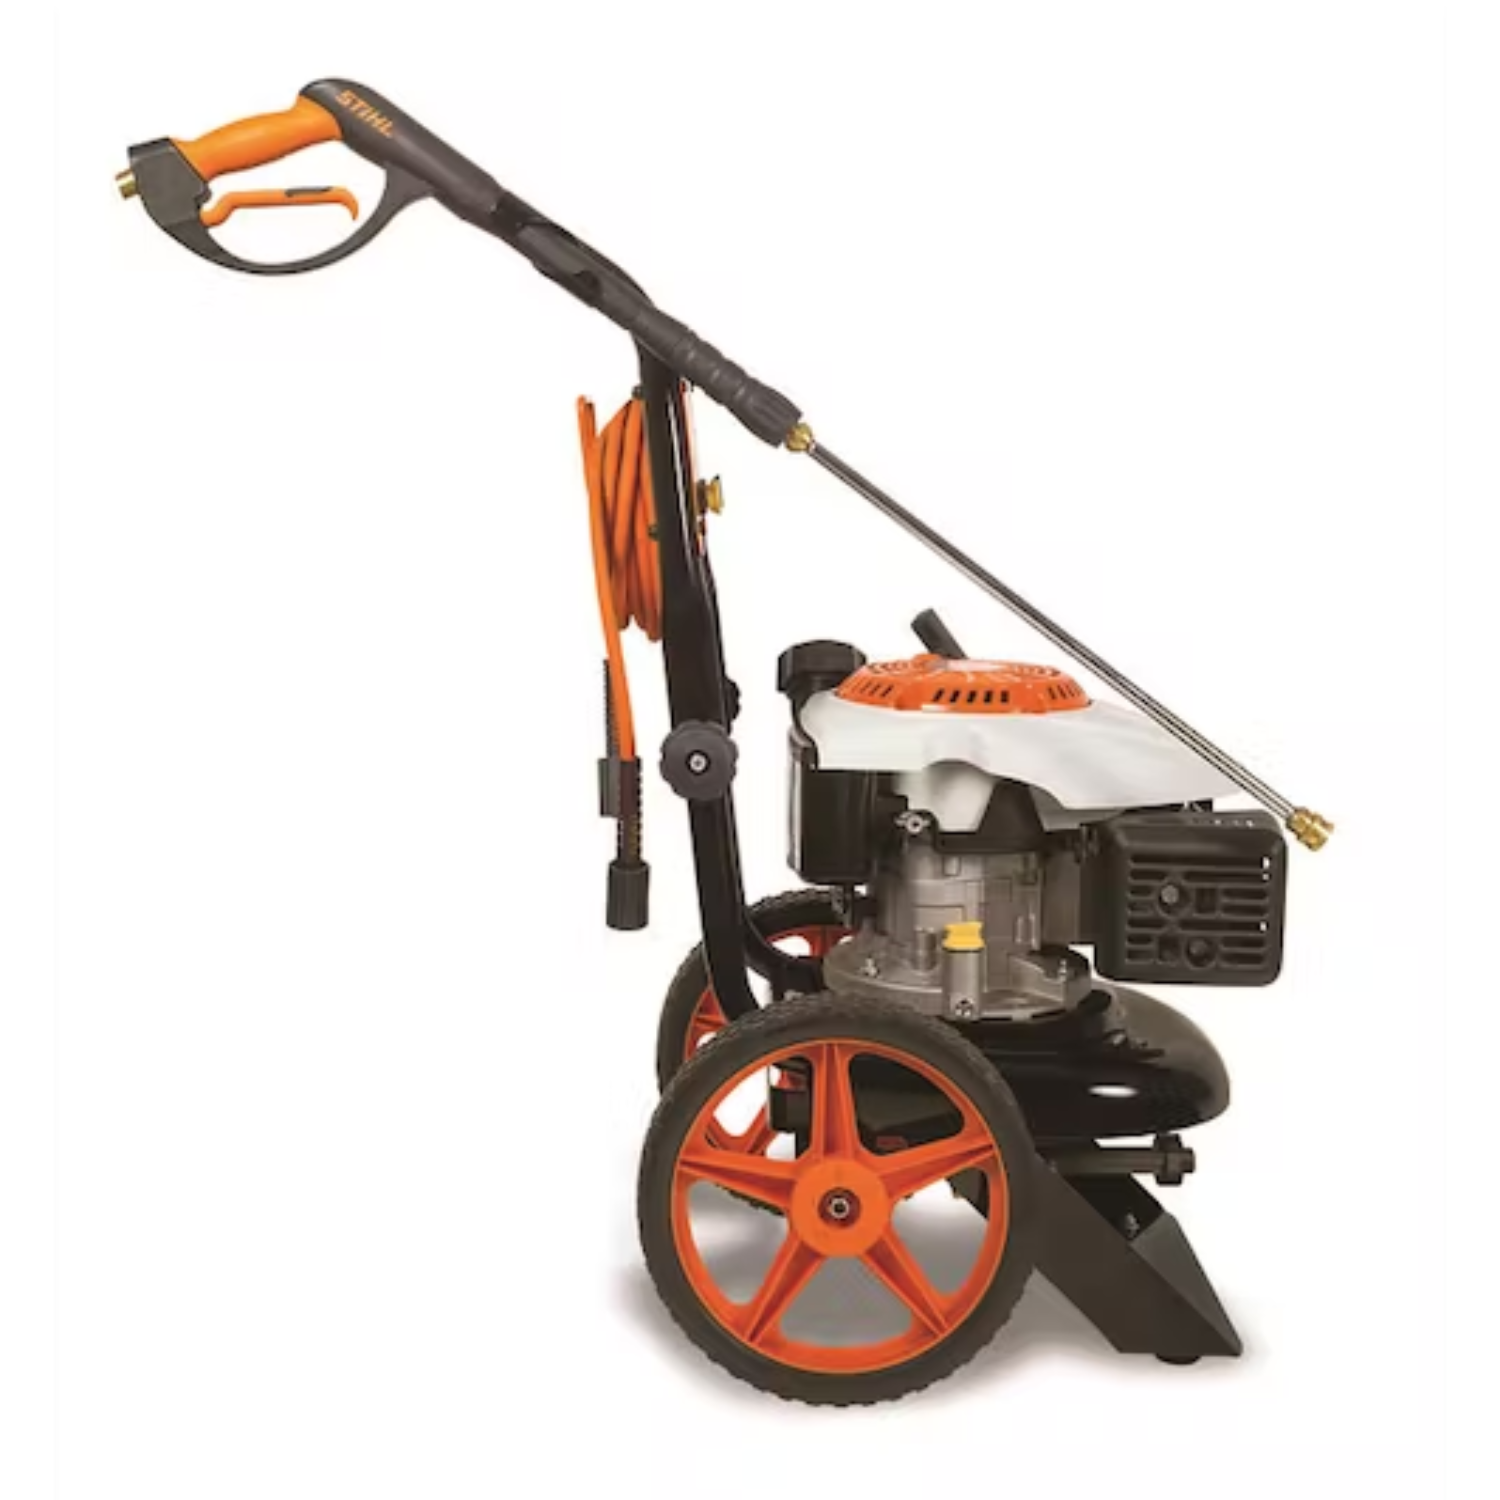 Stihl RE 80 Pressure Washer Review - Consumer Reports